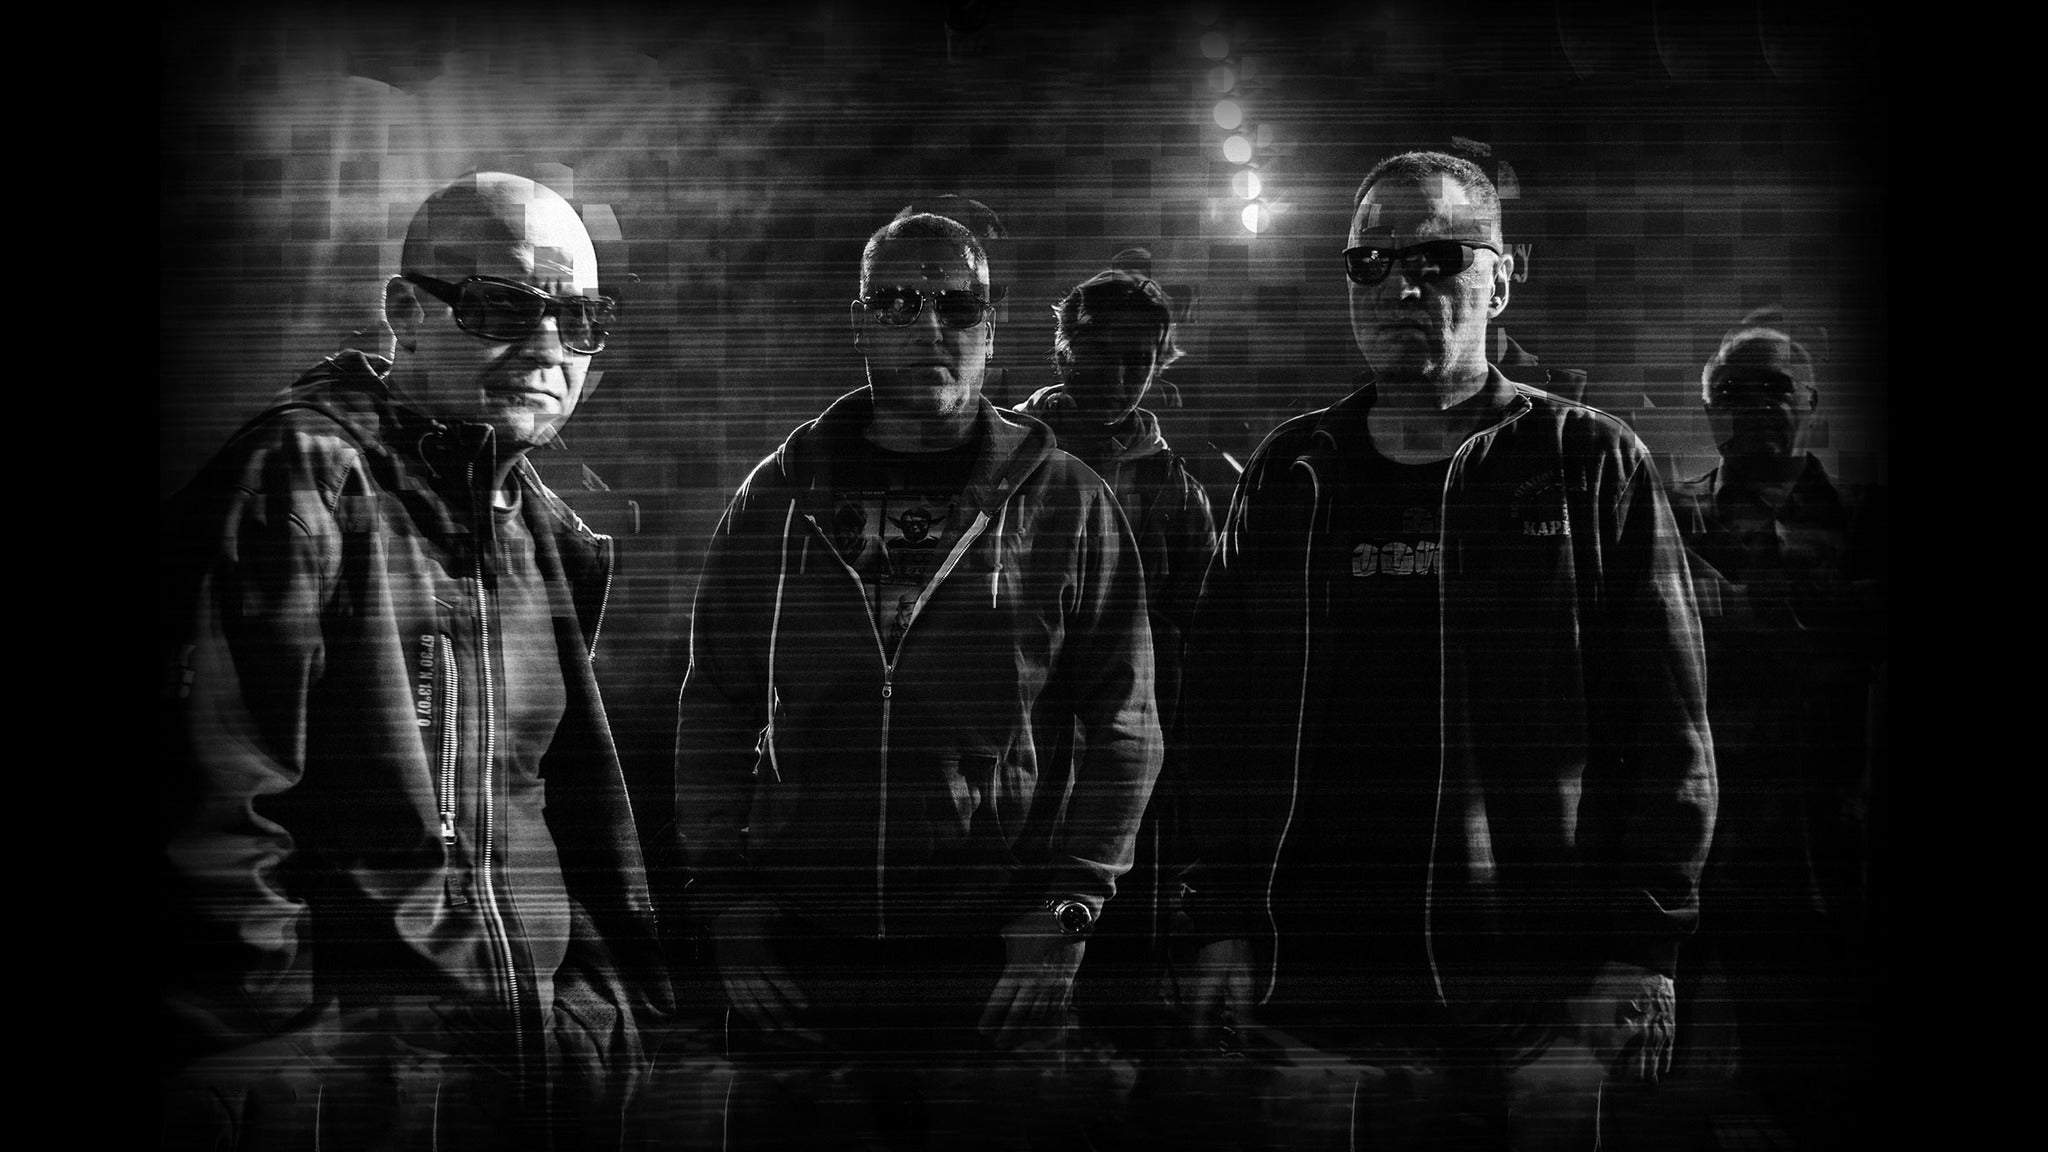 Front 242 with special guests Severed Heads in New York promo photo for Live Nation Mobile App presale offer code